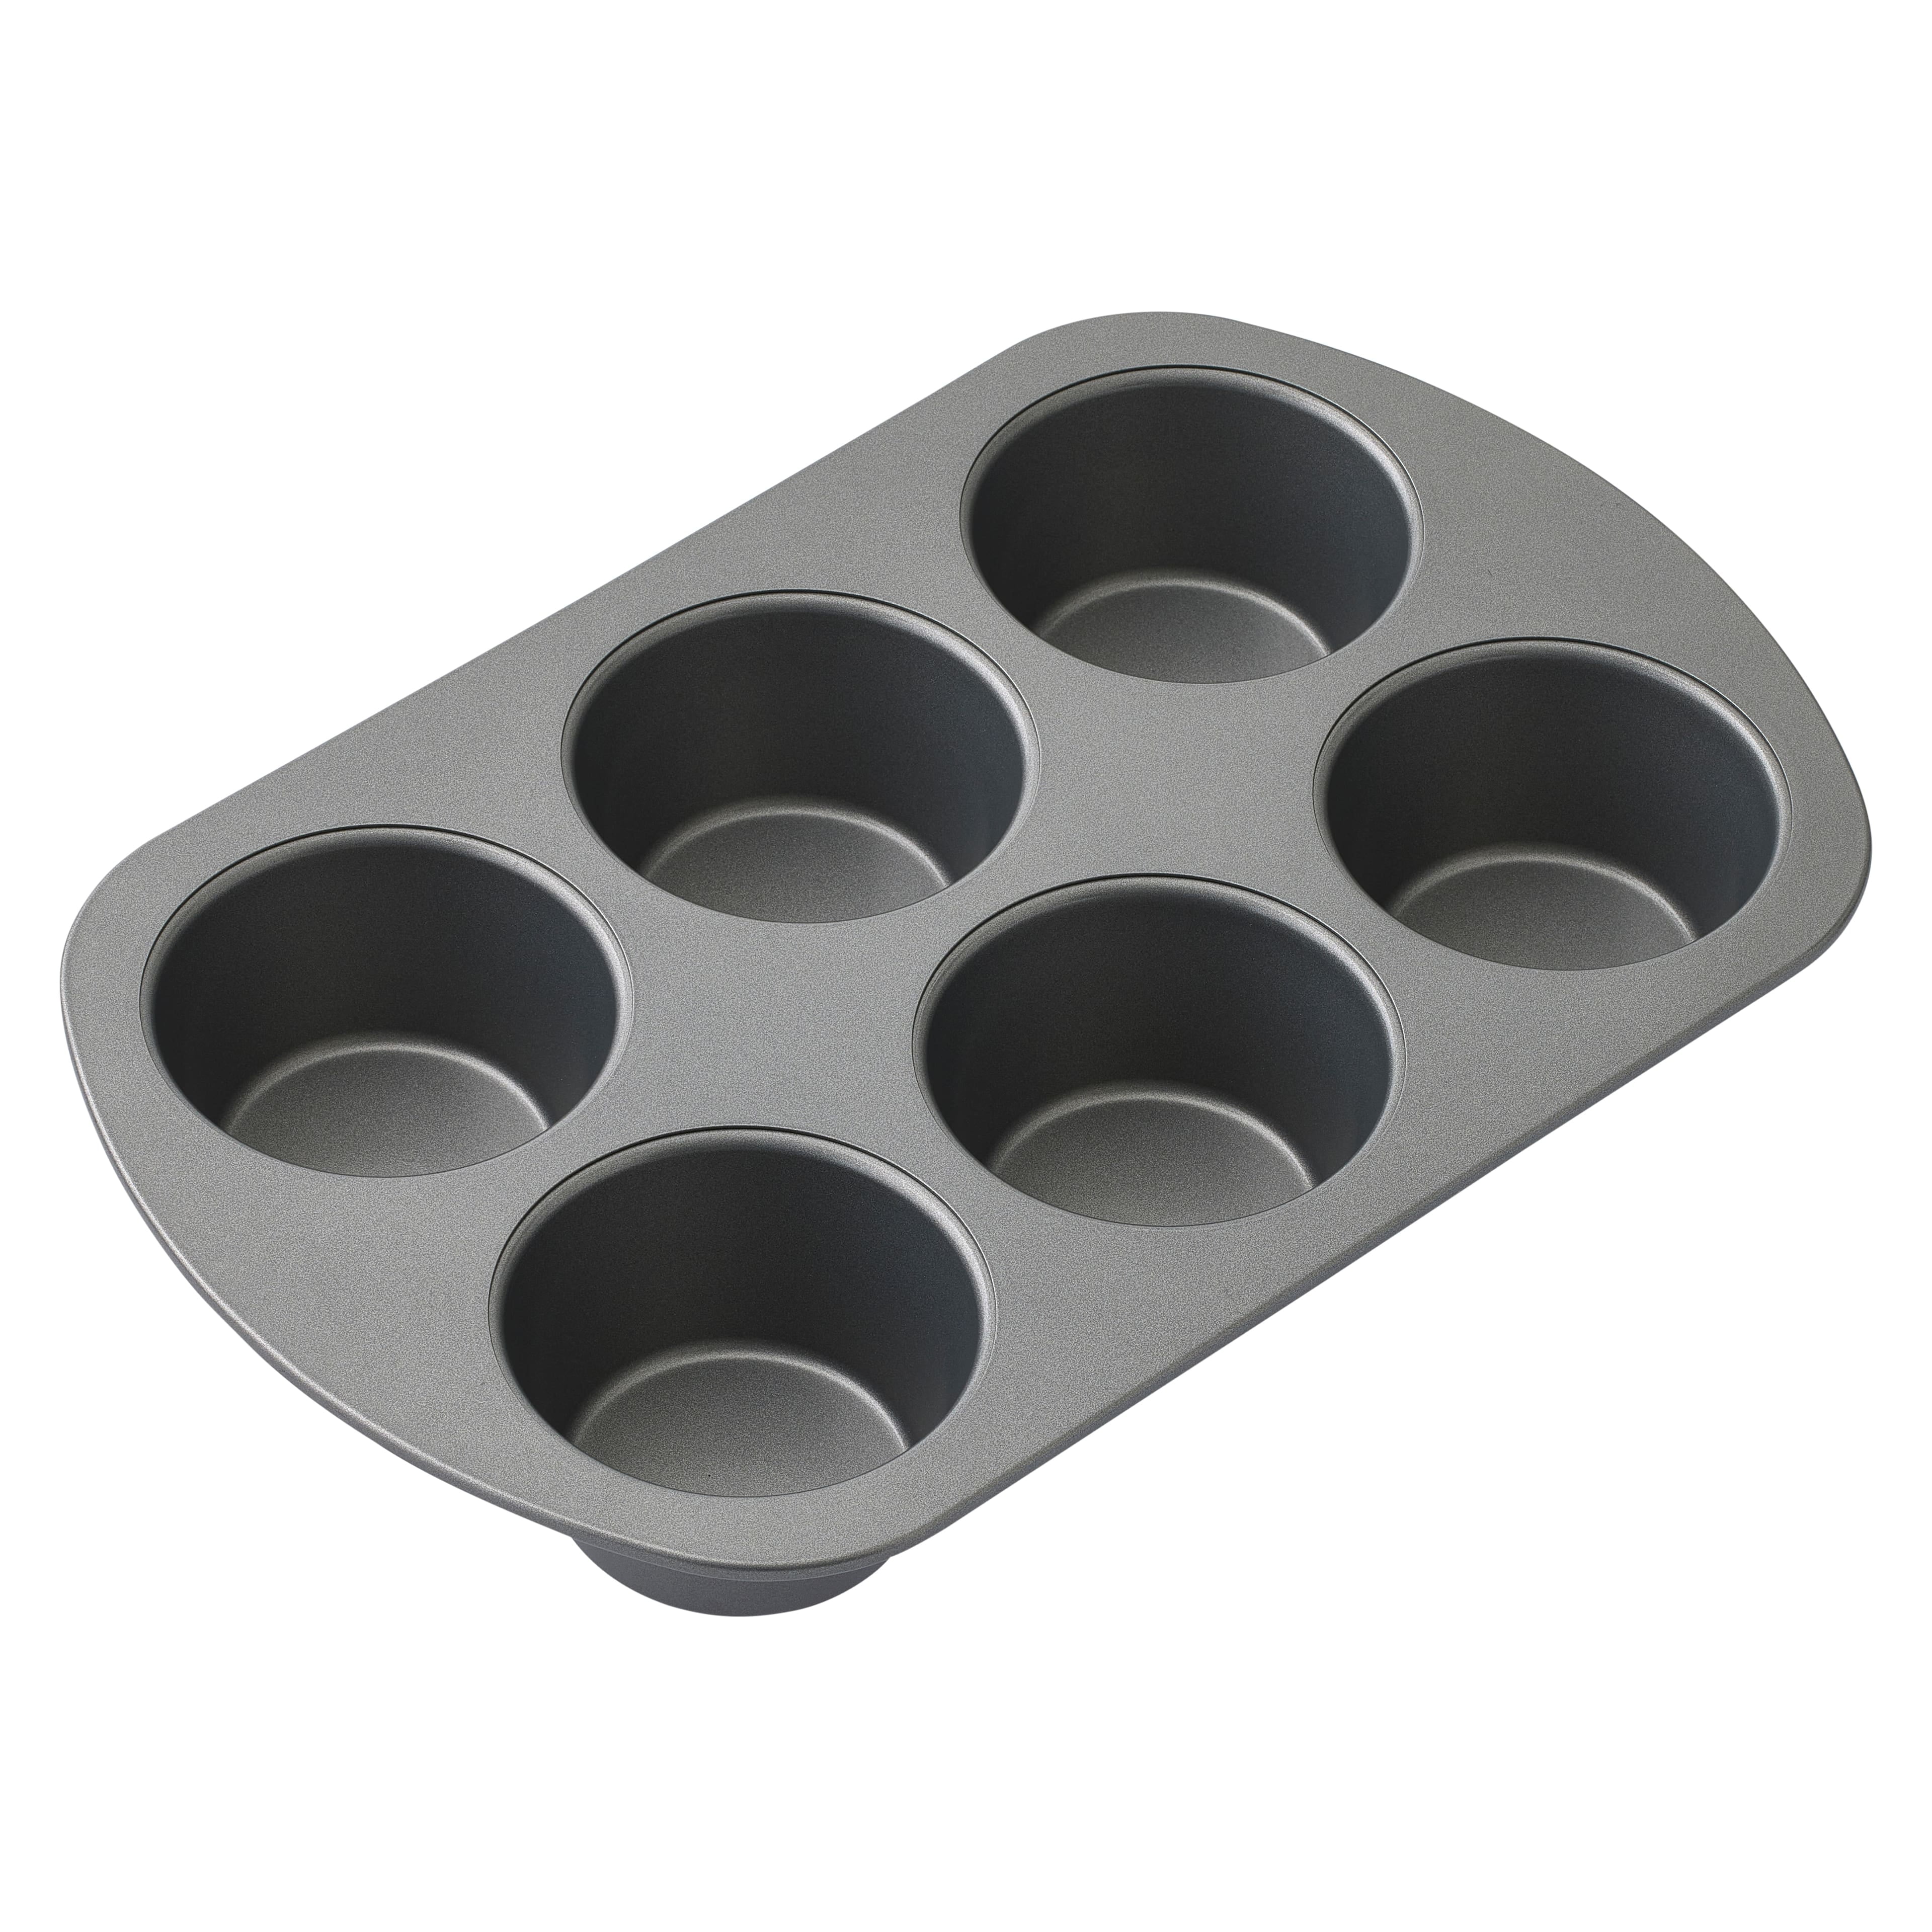  Kitchen Details 6 Cup Texas Muffin Pan